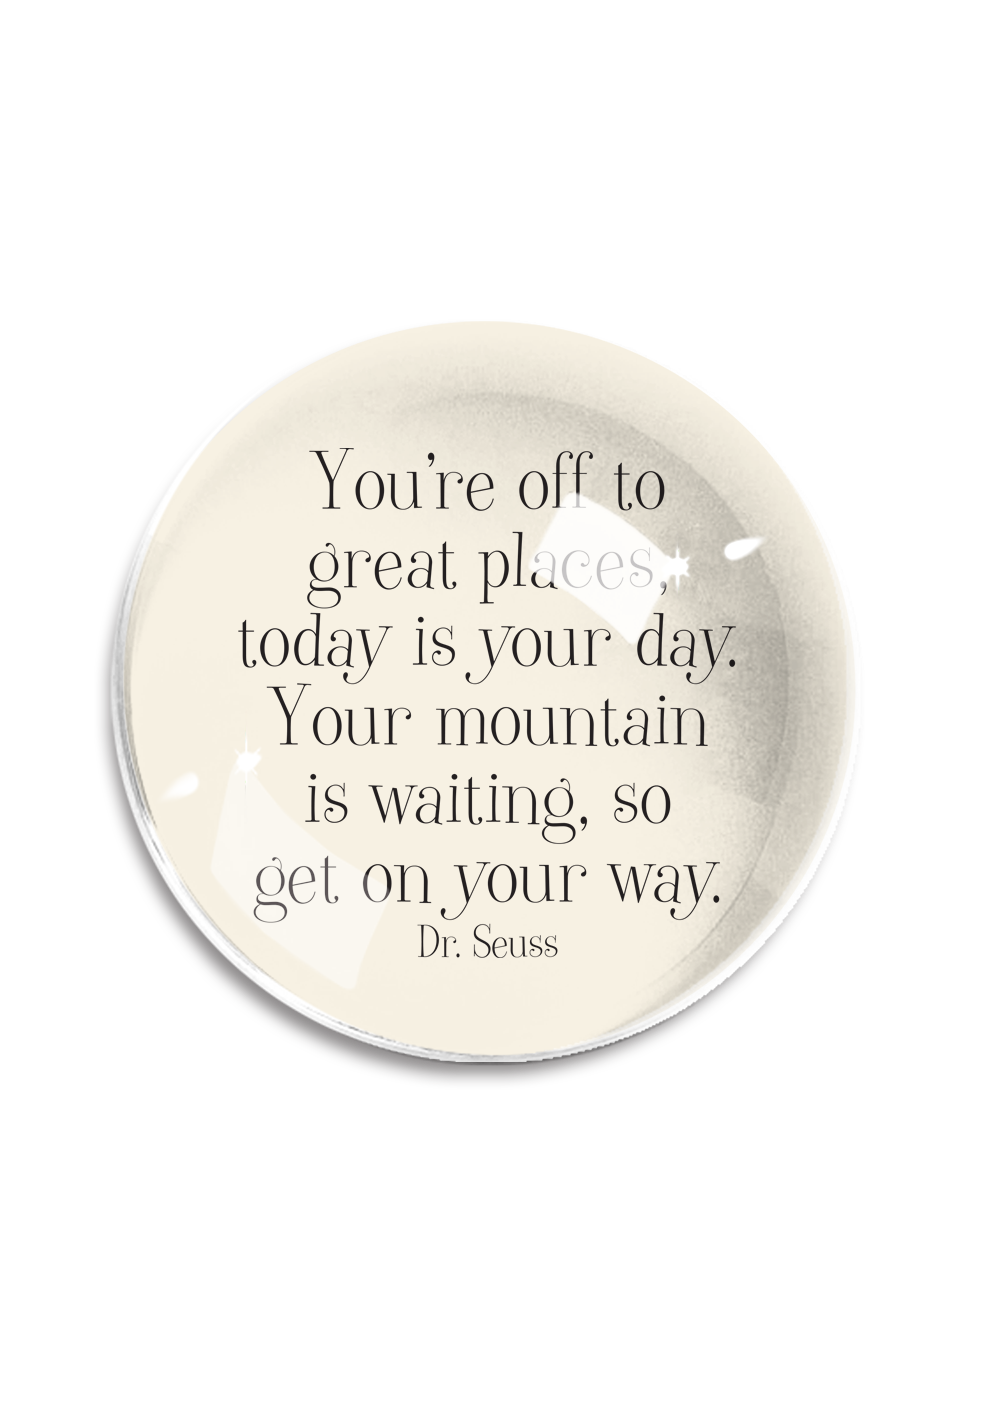 Bensgarden.com | You're Off To Great Places Crystal Dome Paperweight - Ben's Garden. Made in New York City.